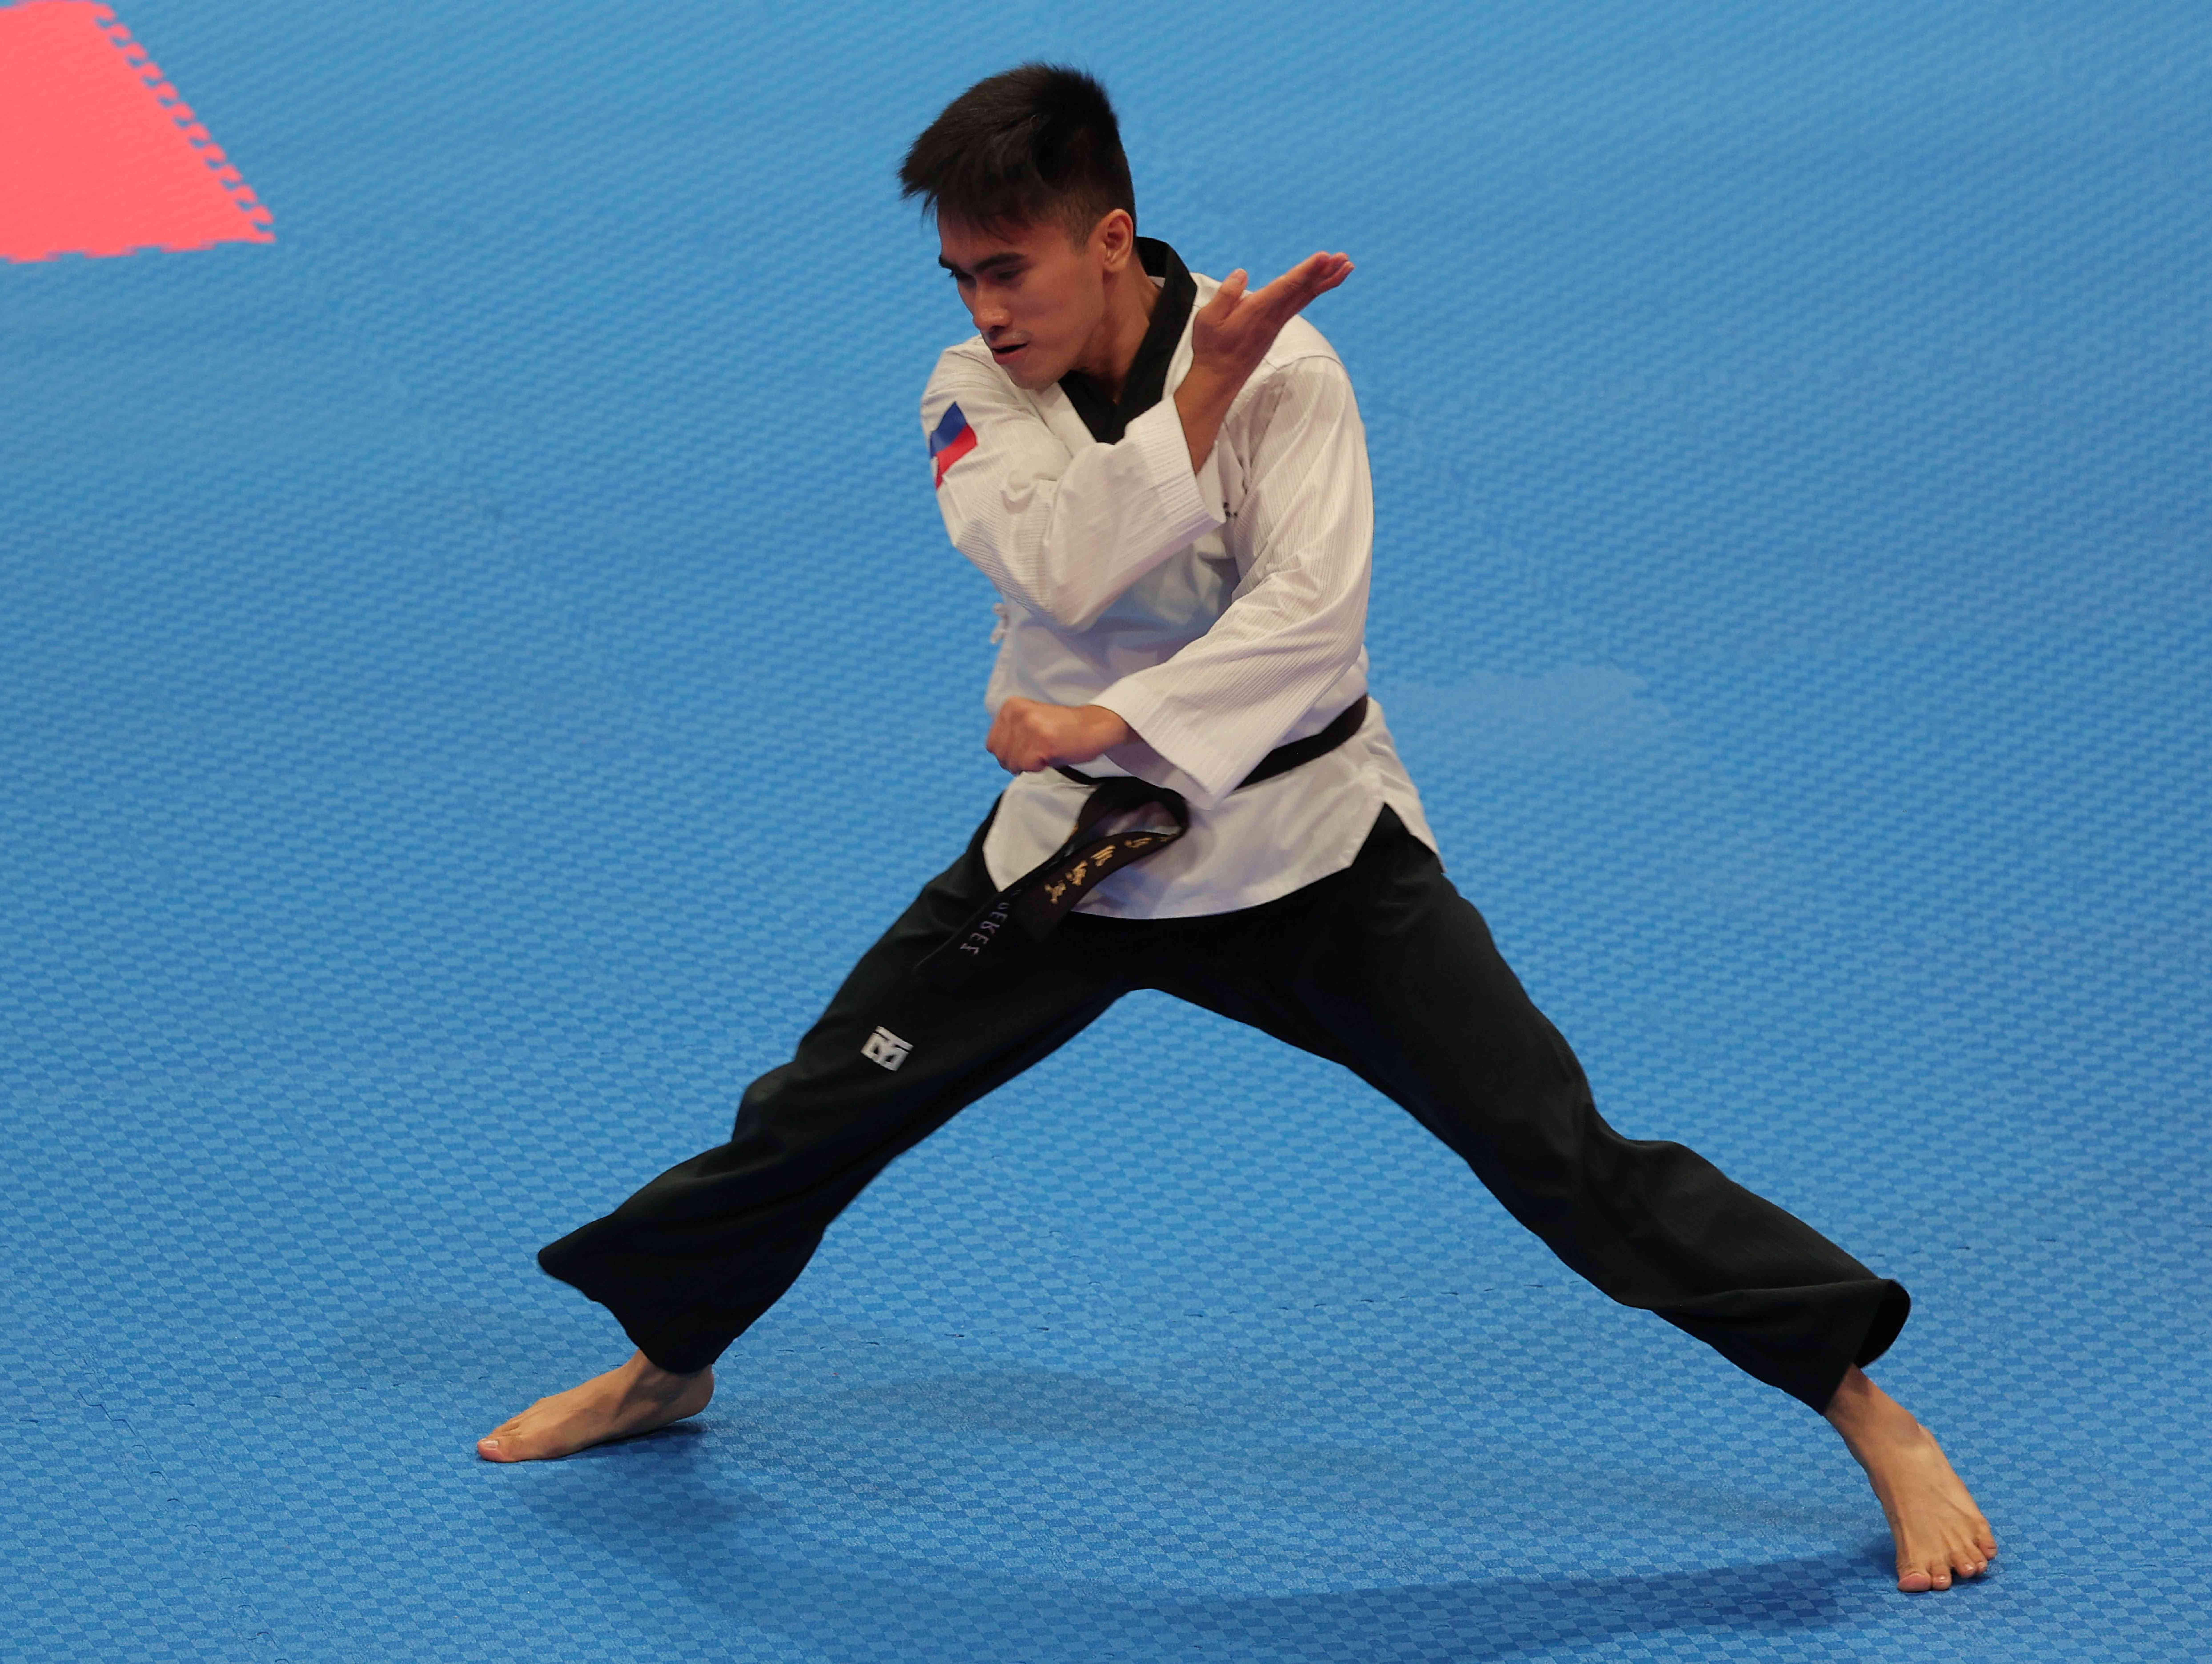 Patrick King Perez shows off his form during the men’s poomsae event. —PSC POOL PHOTO